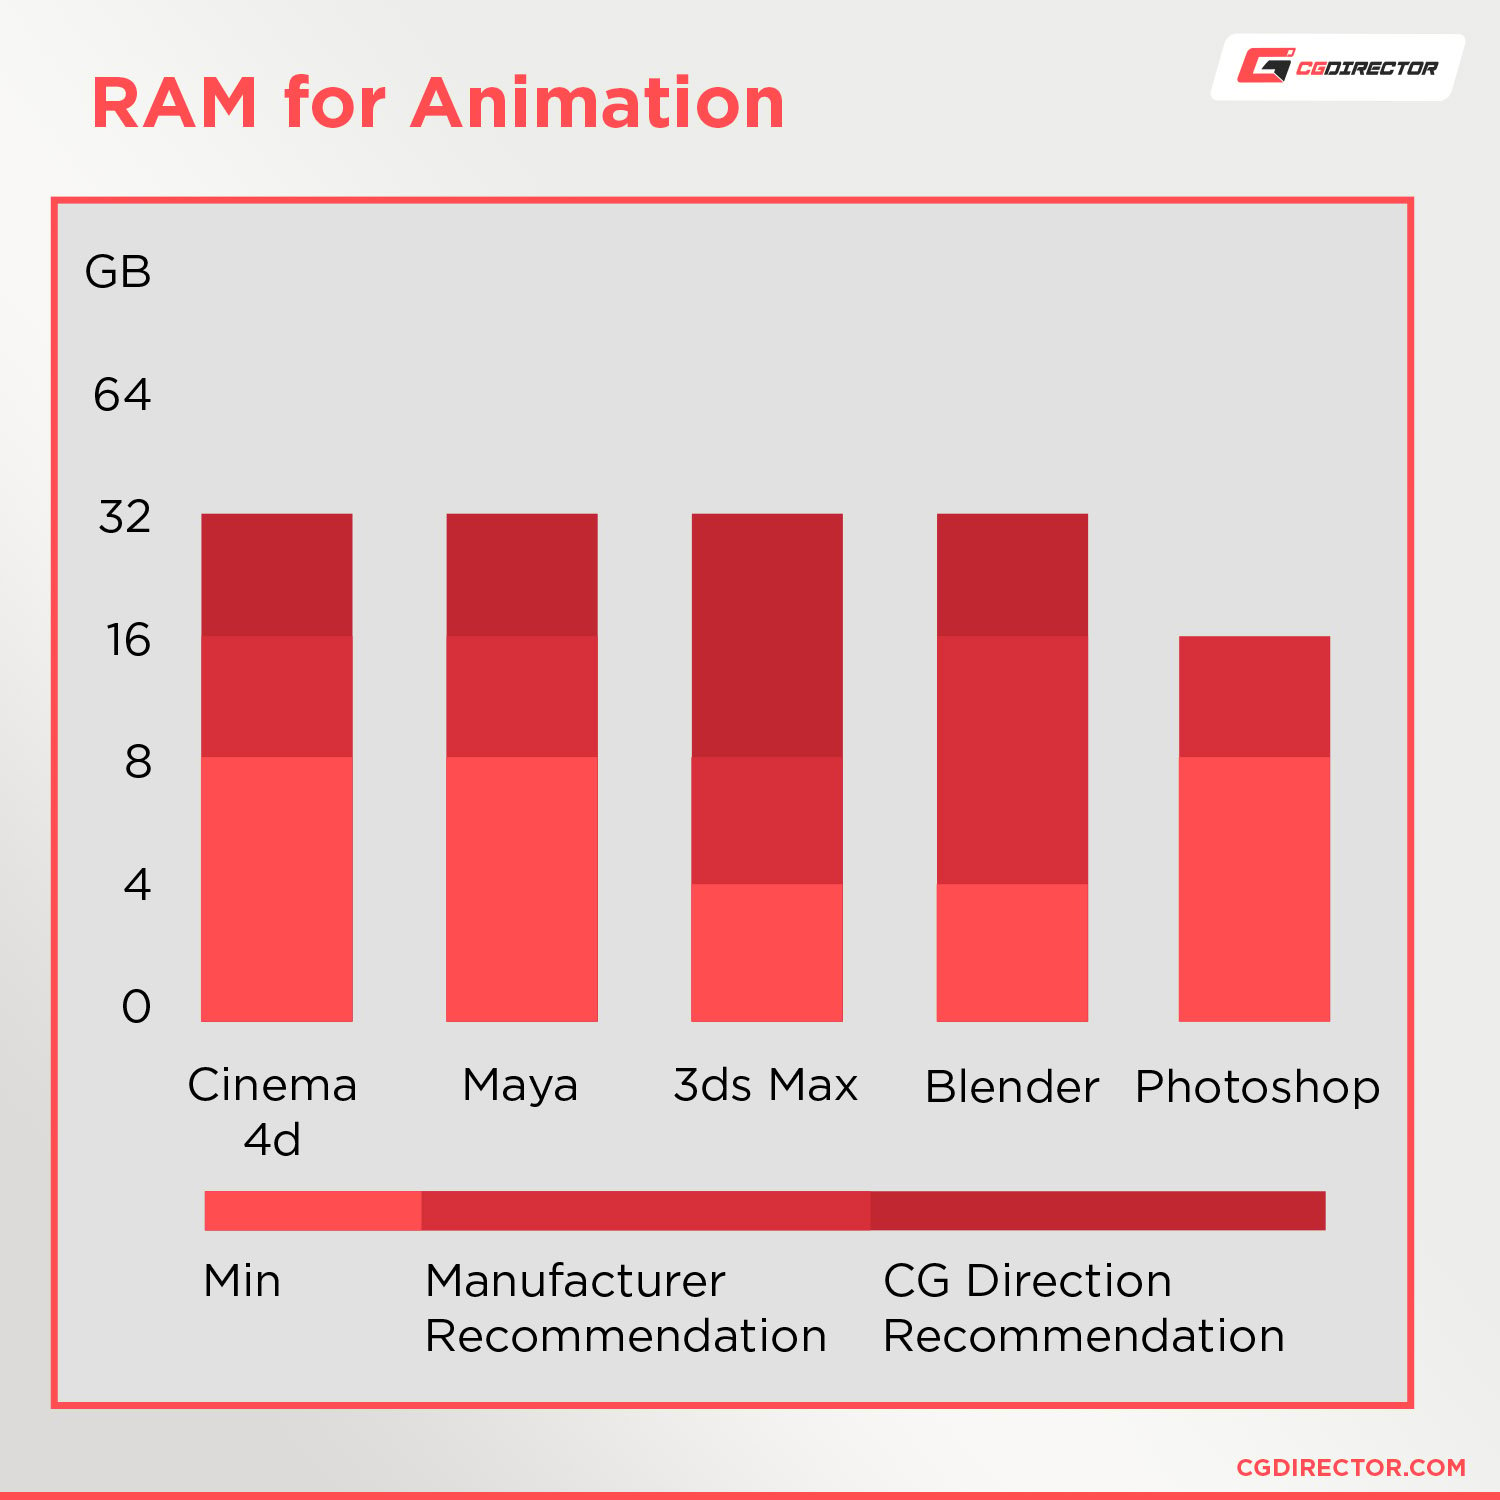 RAM for Animation